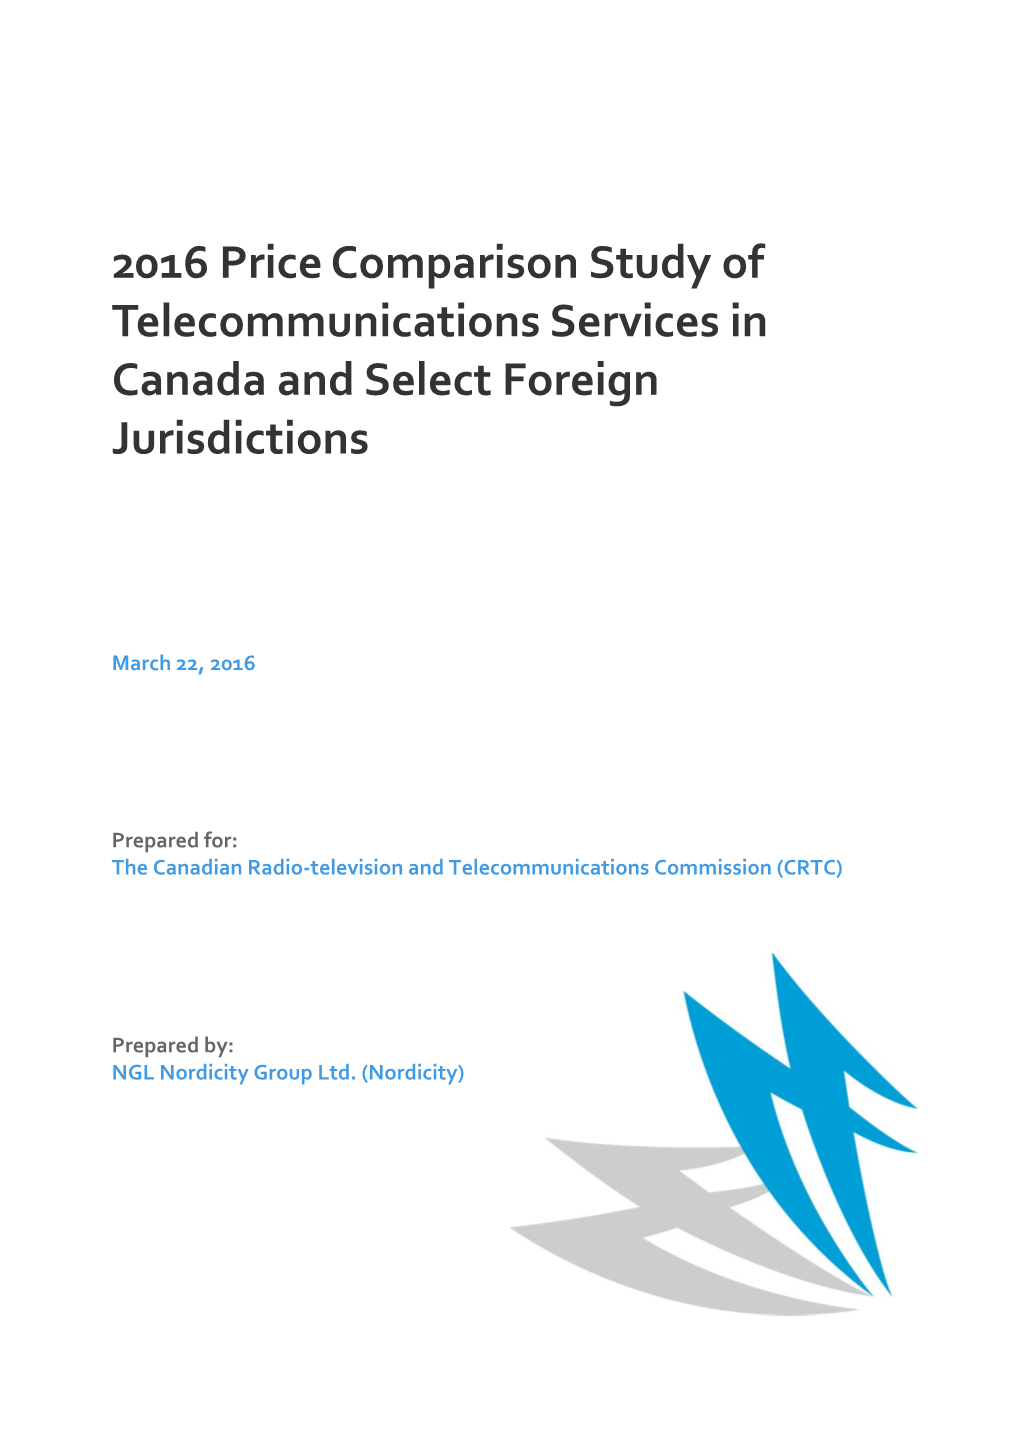 2016 Price Comparison Study of Telecommunications Services in Canada and Select Foreign Jurisdictions